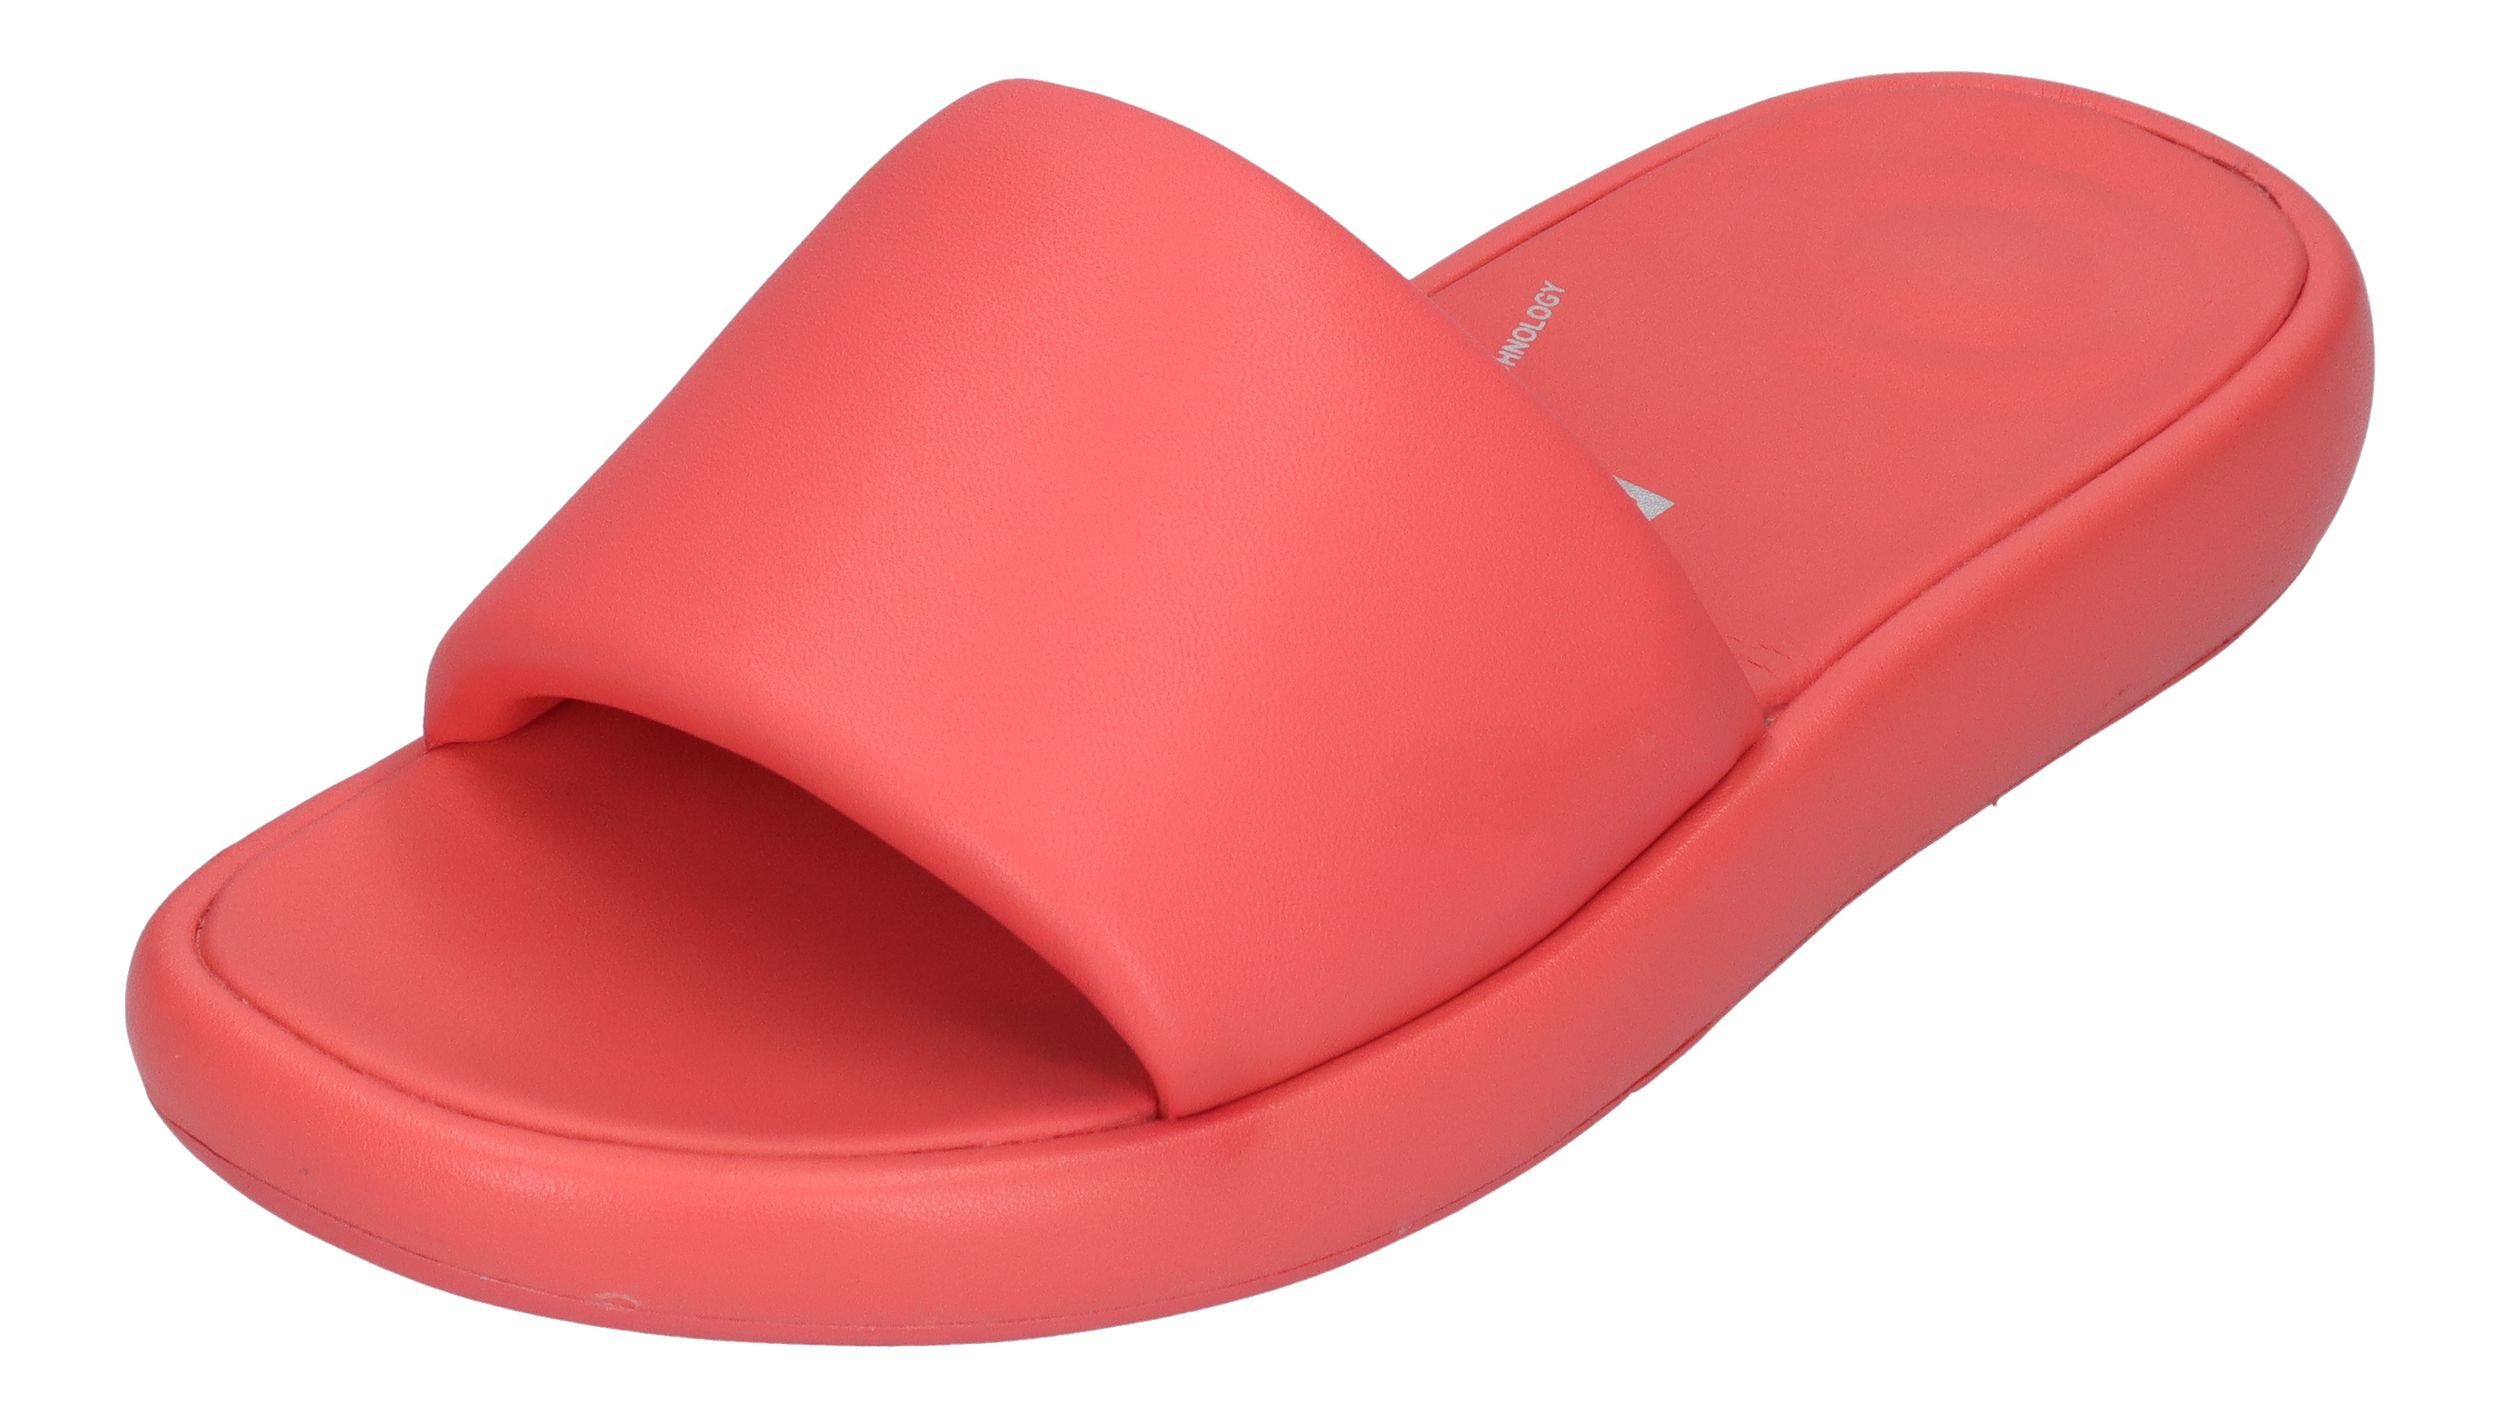 Fitflop iQUSHION D-LUXE PADDED LEATHER SLIDES Zehentrenner Rosy Coral